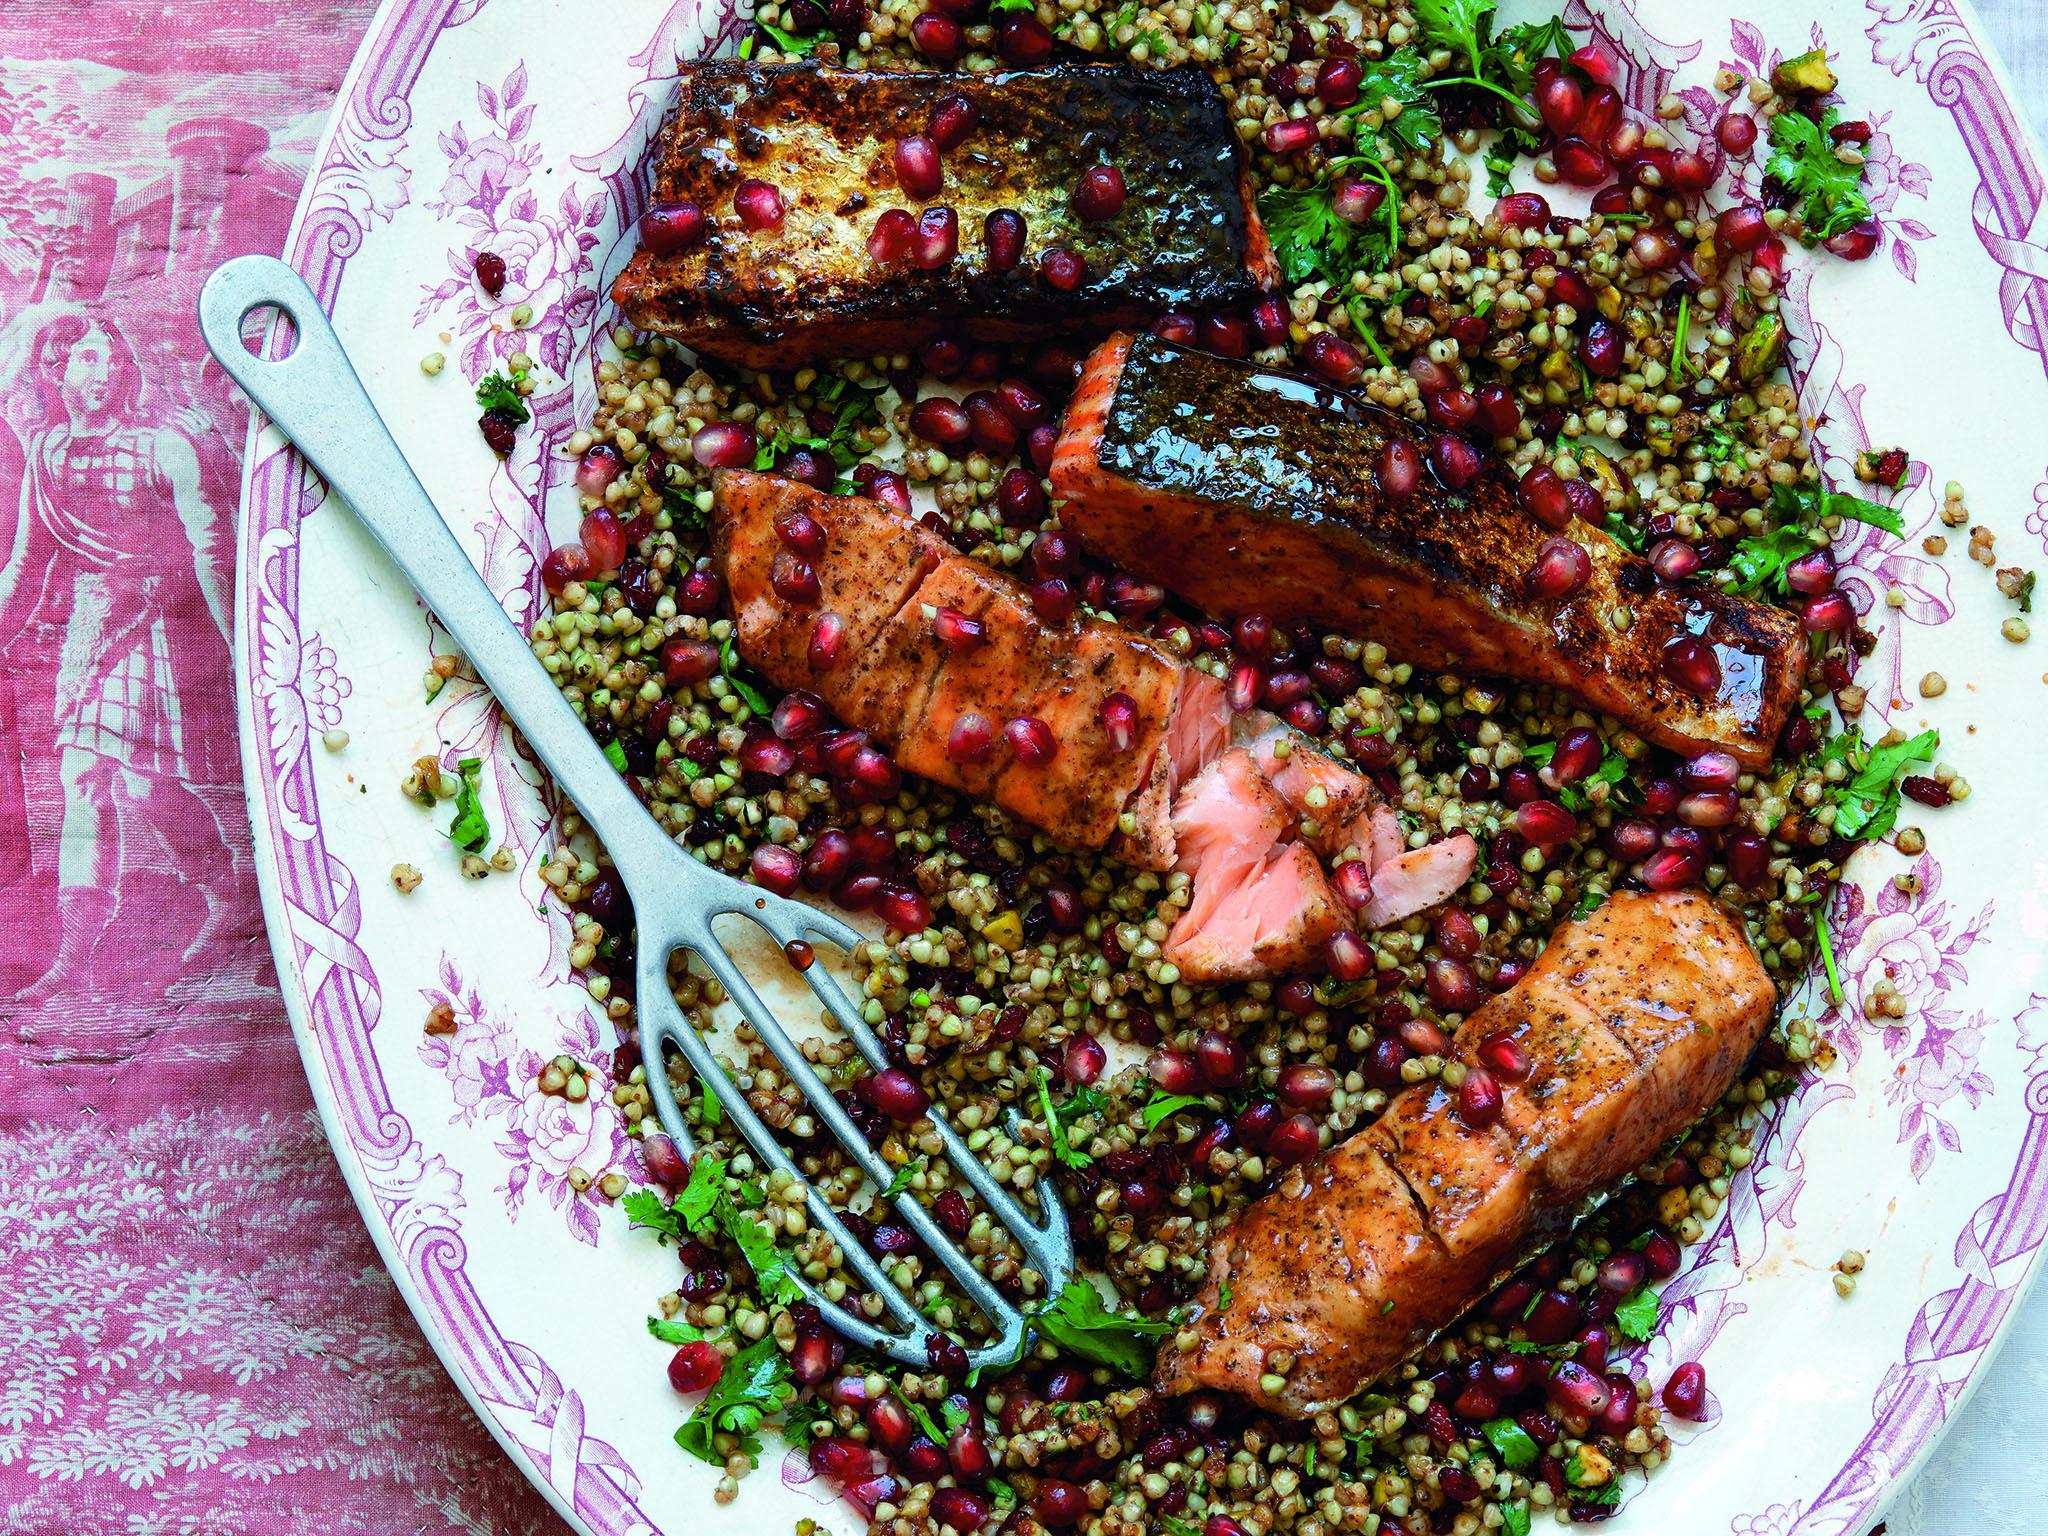 The sticky salmon and pomegranate dish is quick and easy to make. Serve it with Emma's buckwheat and barberry salad (recipes below)